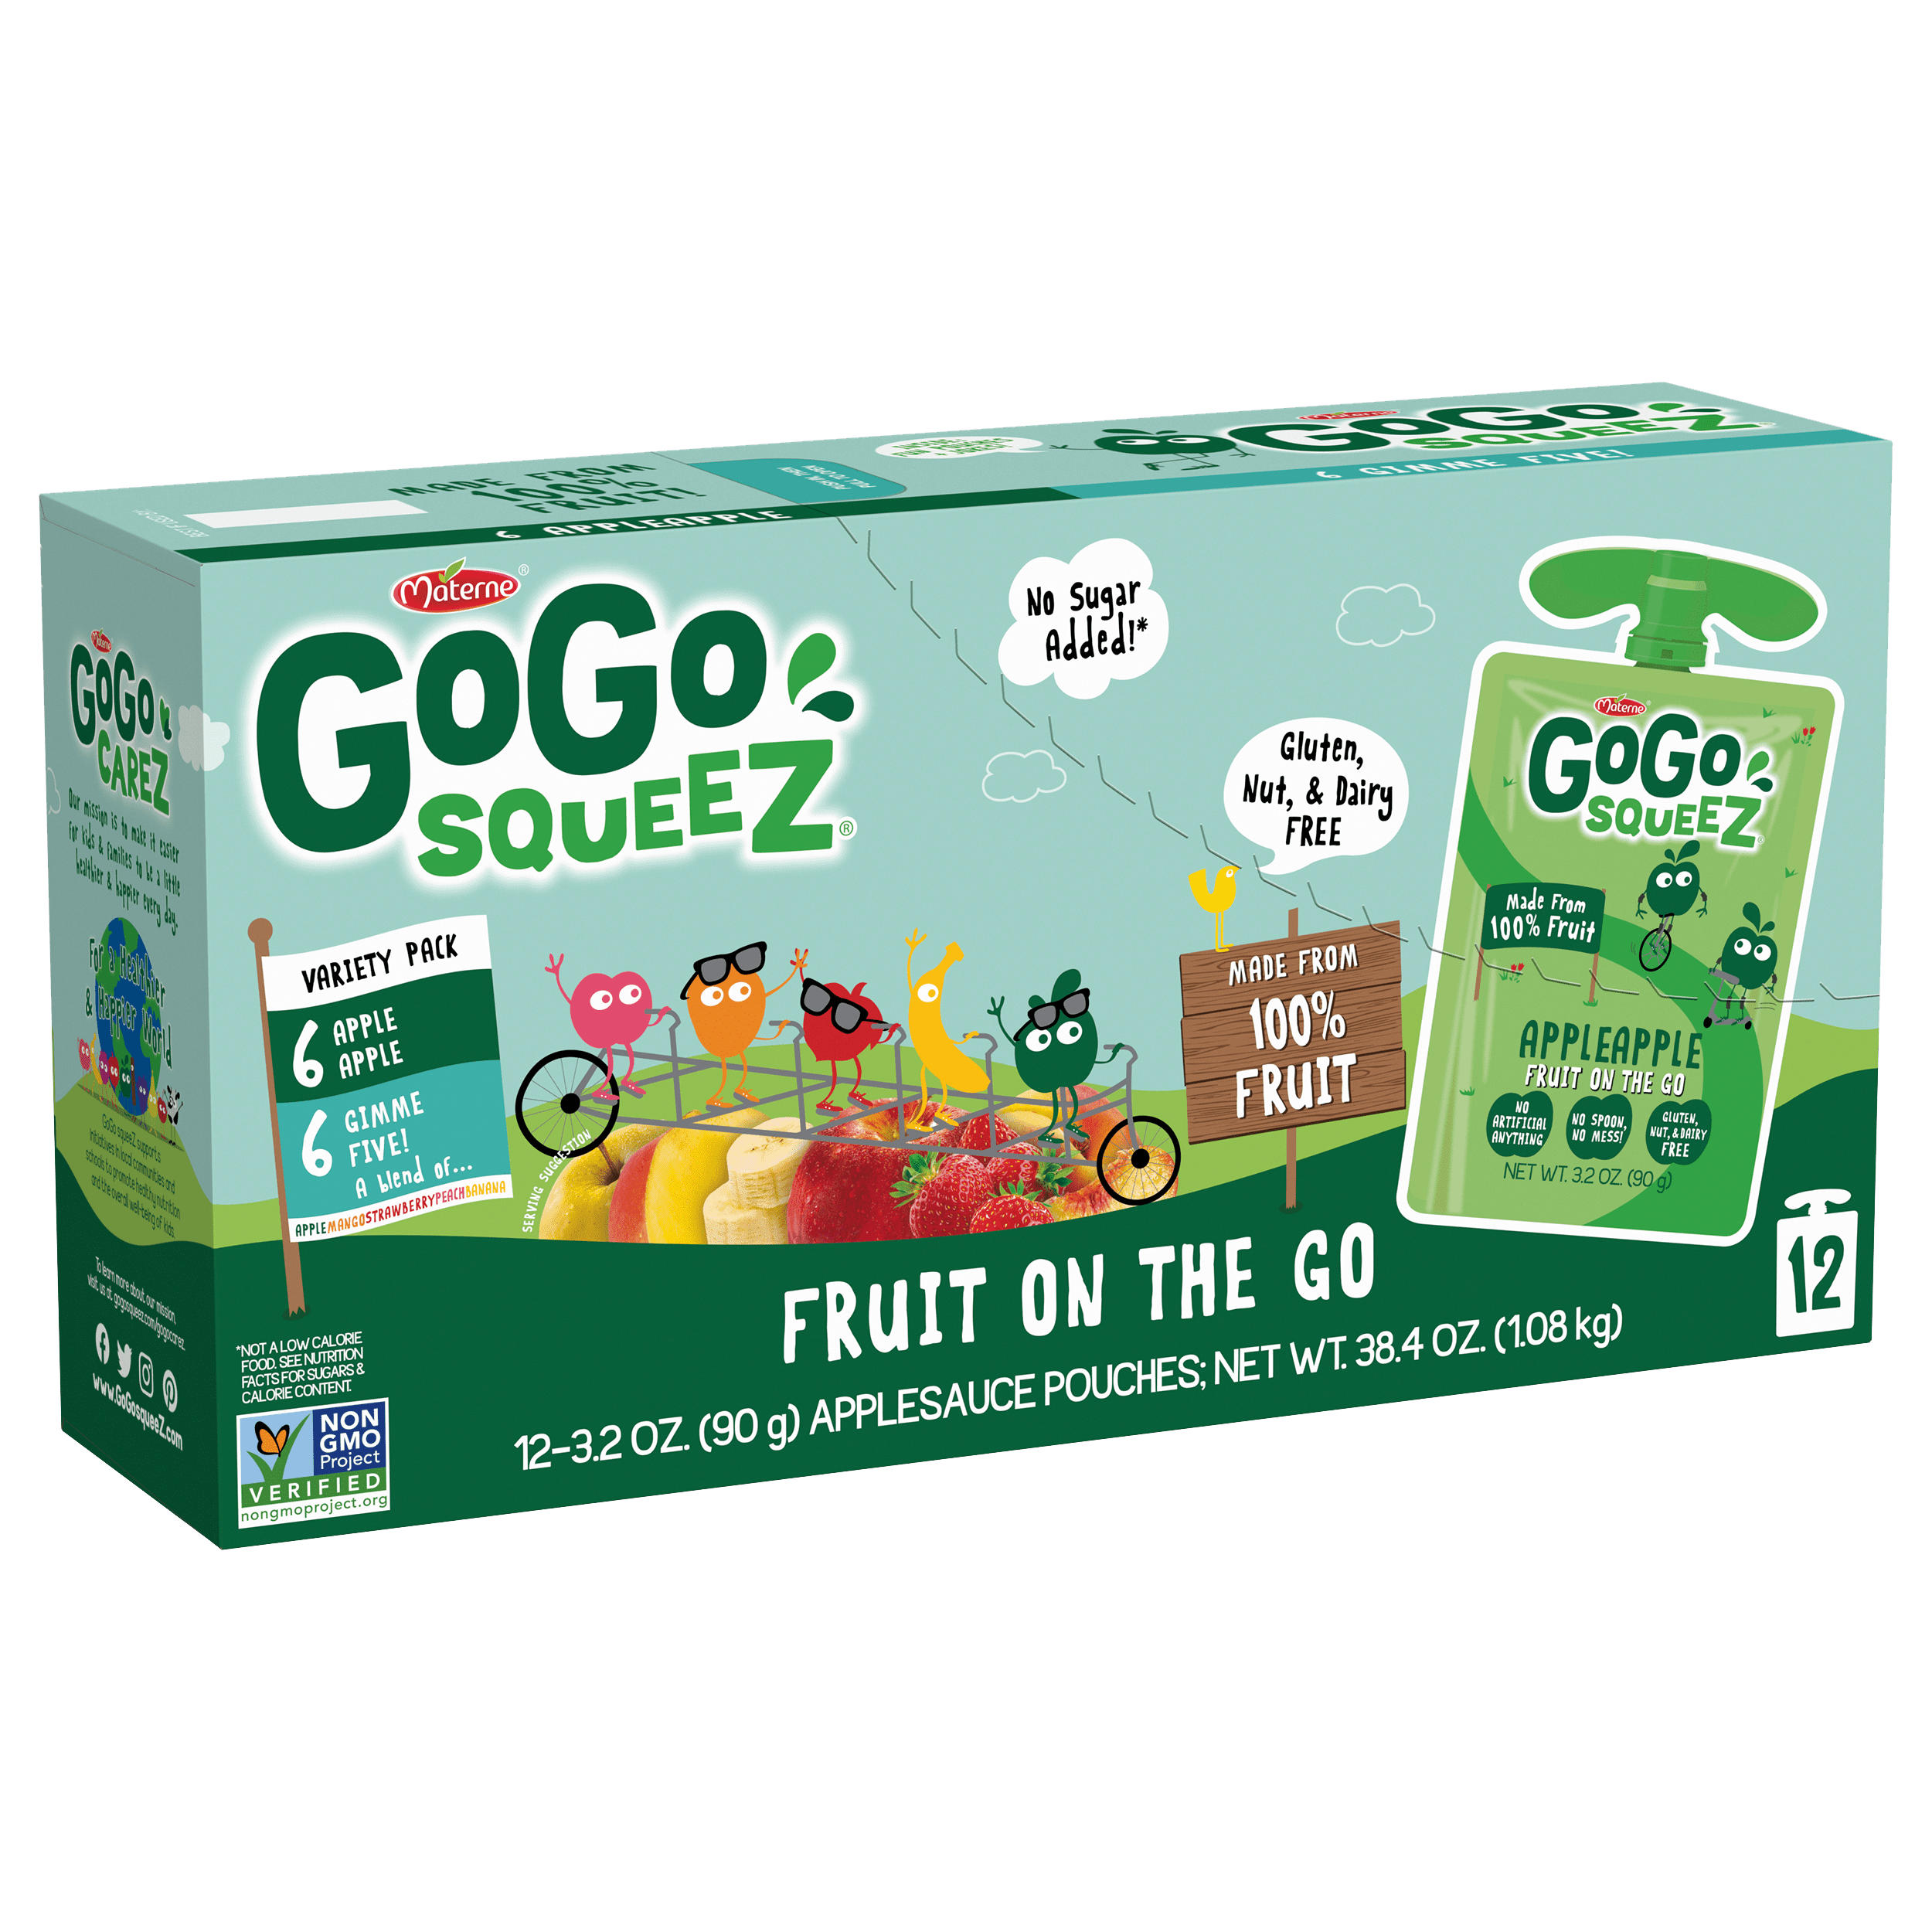 Gogo Squeez Pouches Fruit Blend Snack Apple Apple & Gimme Five 12 pack Variety Pack Box